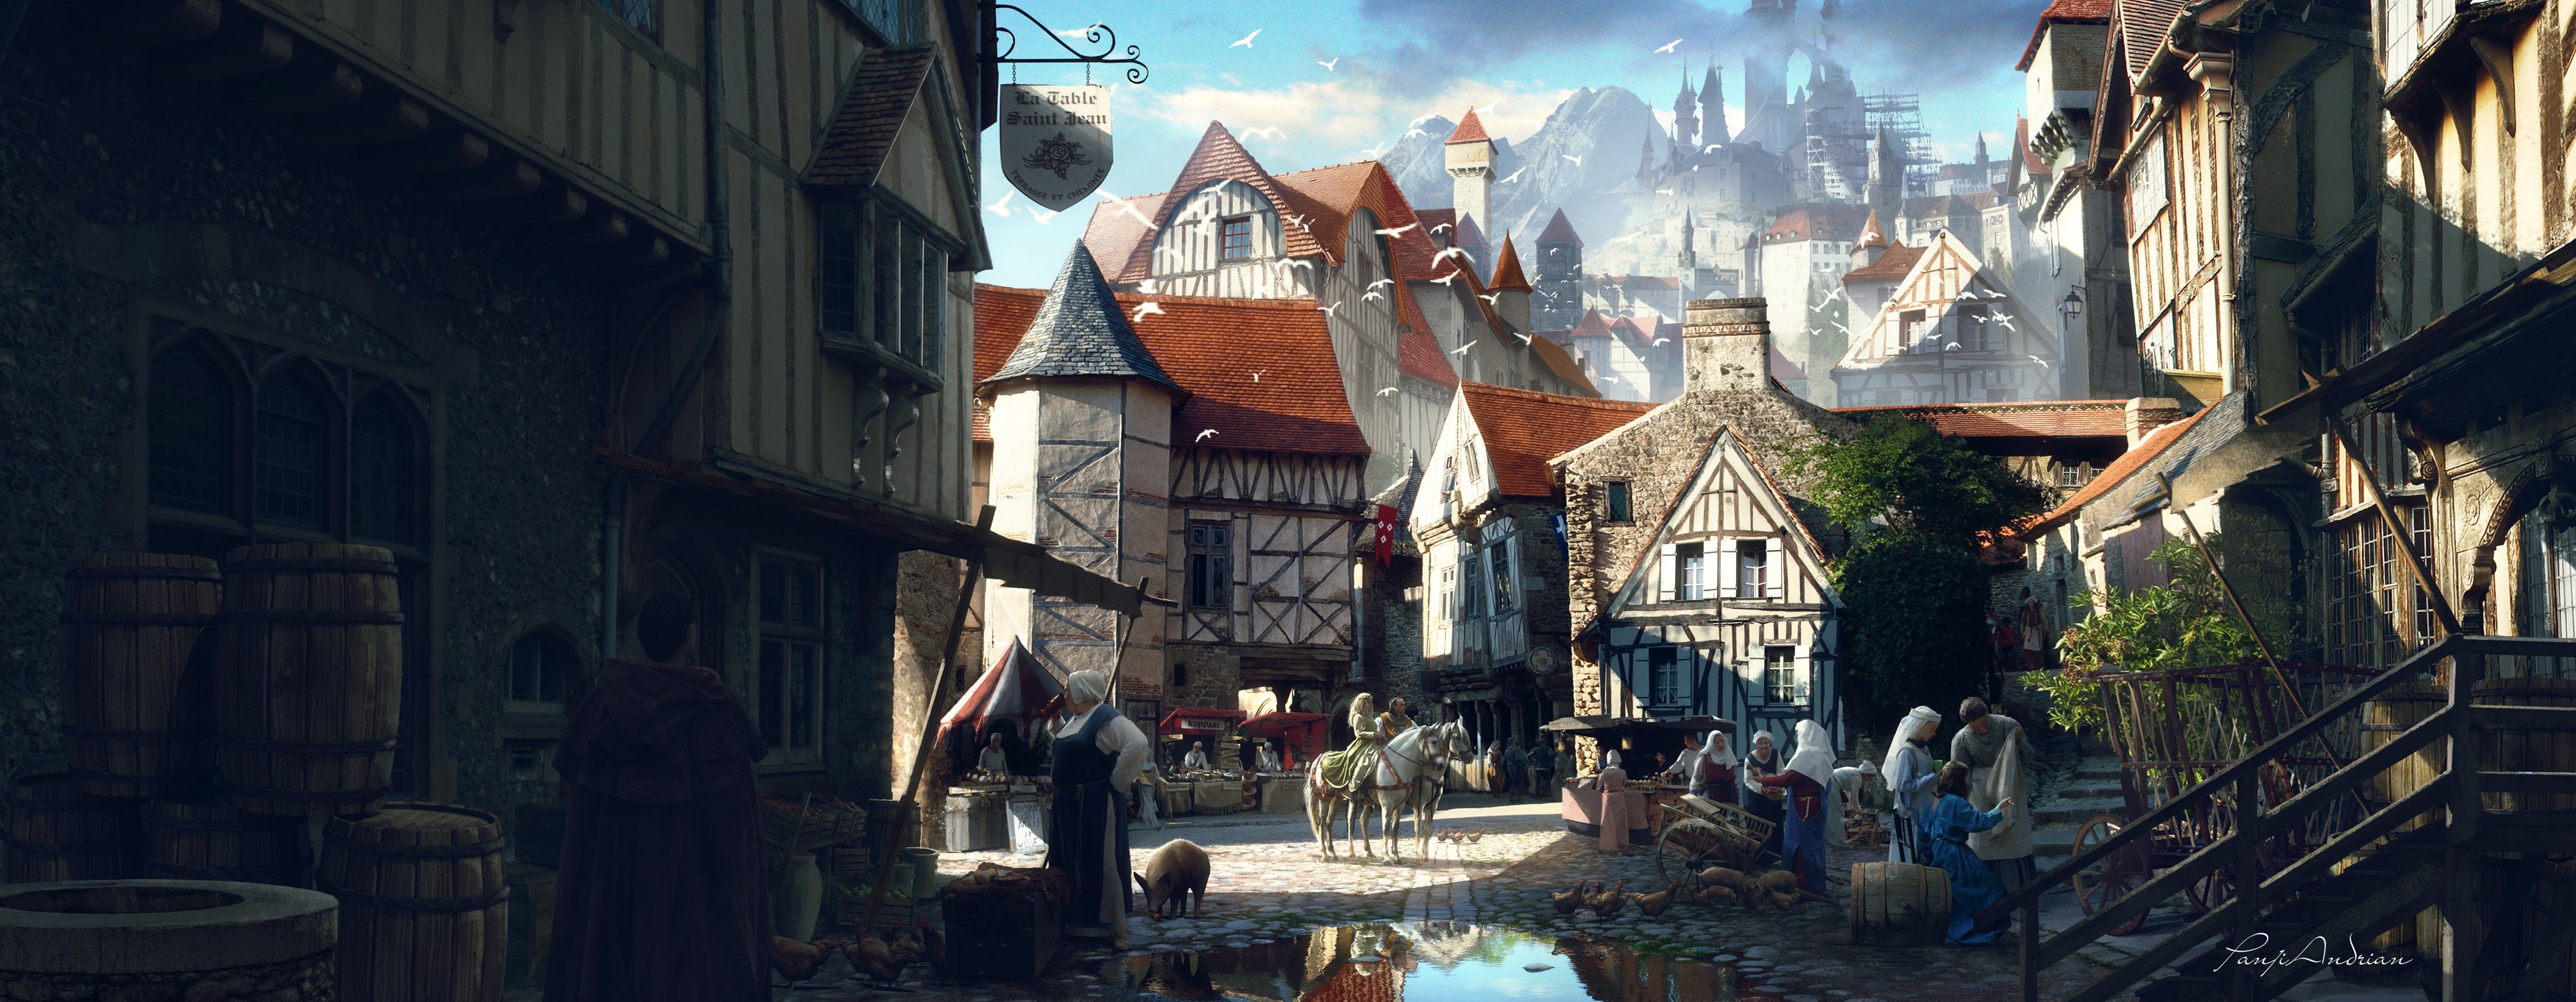 medieval 1080P 2k 4k Full HD Wallpapers Backgrounds Free Download   Wallpaper Crafter